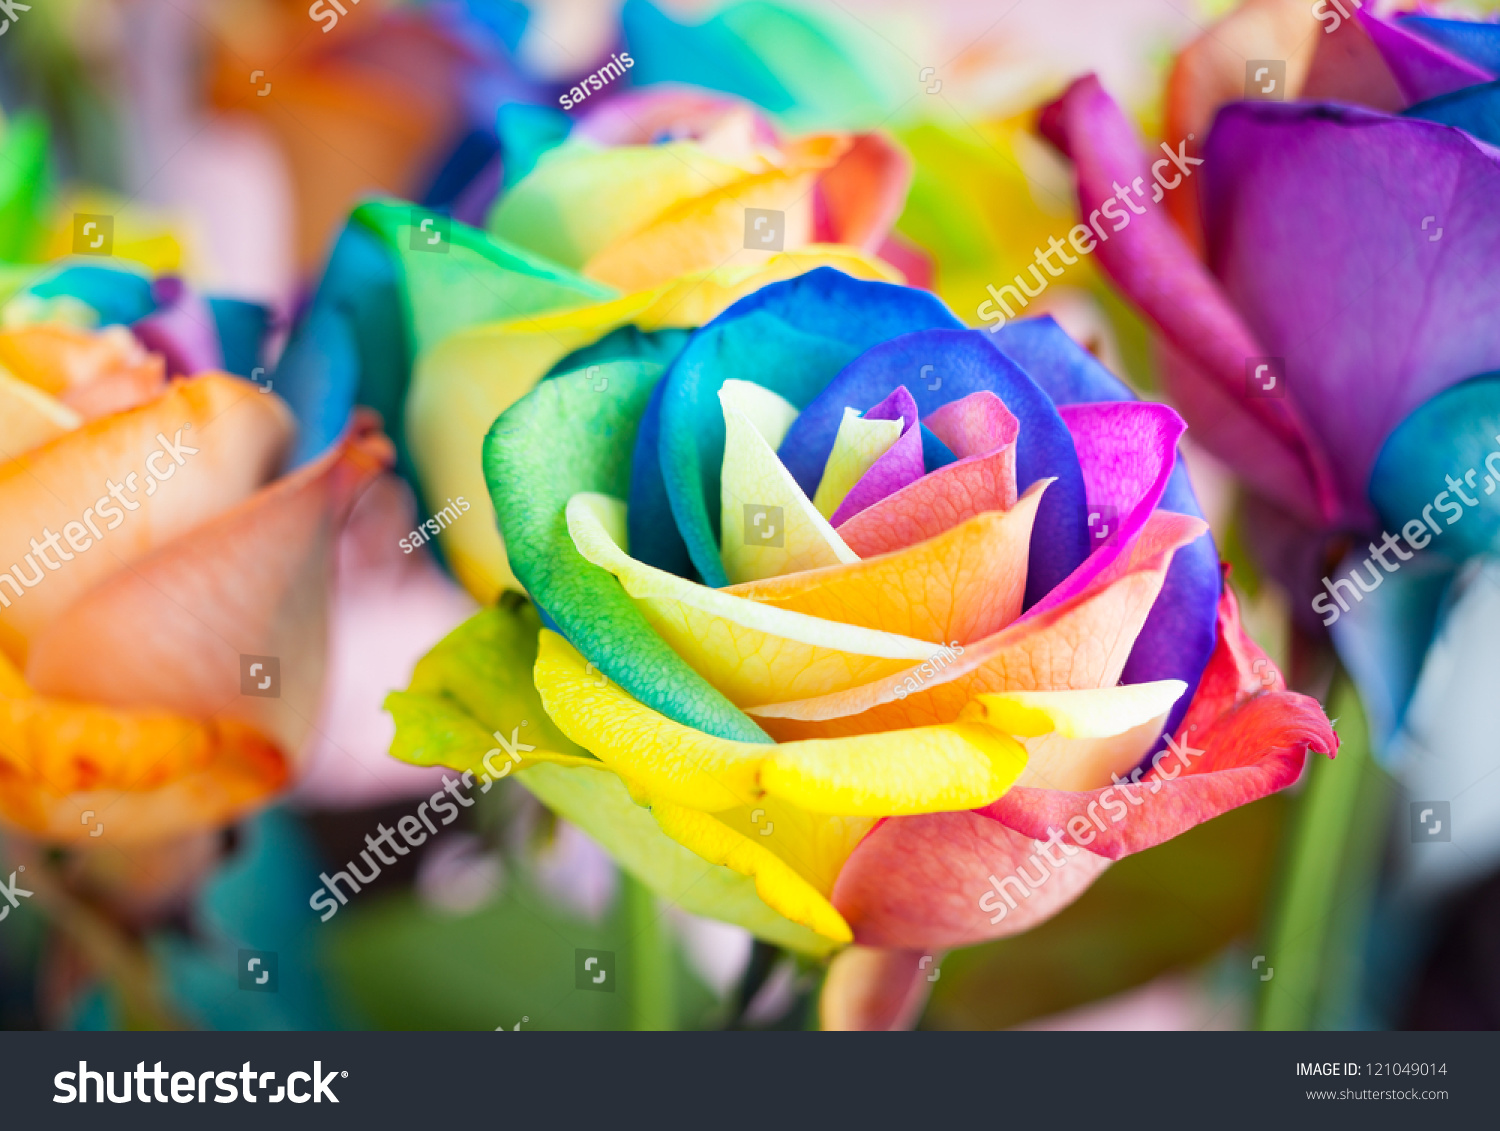 Bouquet Of Multi-Colored Roses (Rainbow Rose) Stock Photo 121049014 ...